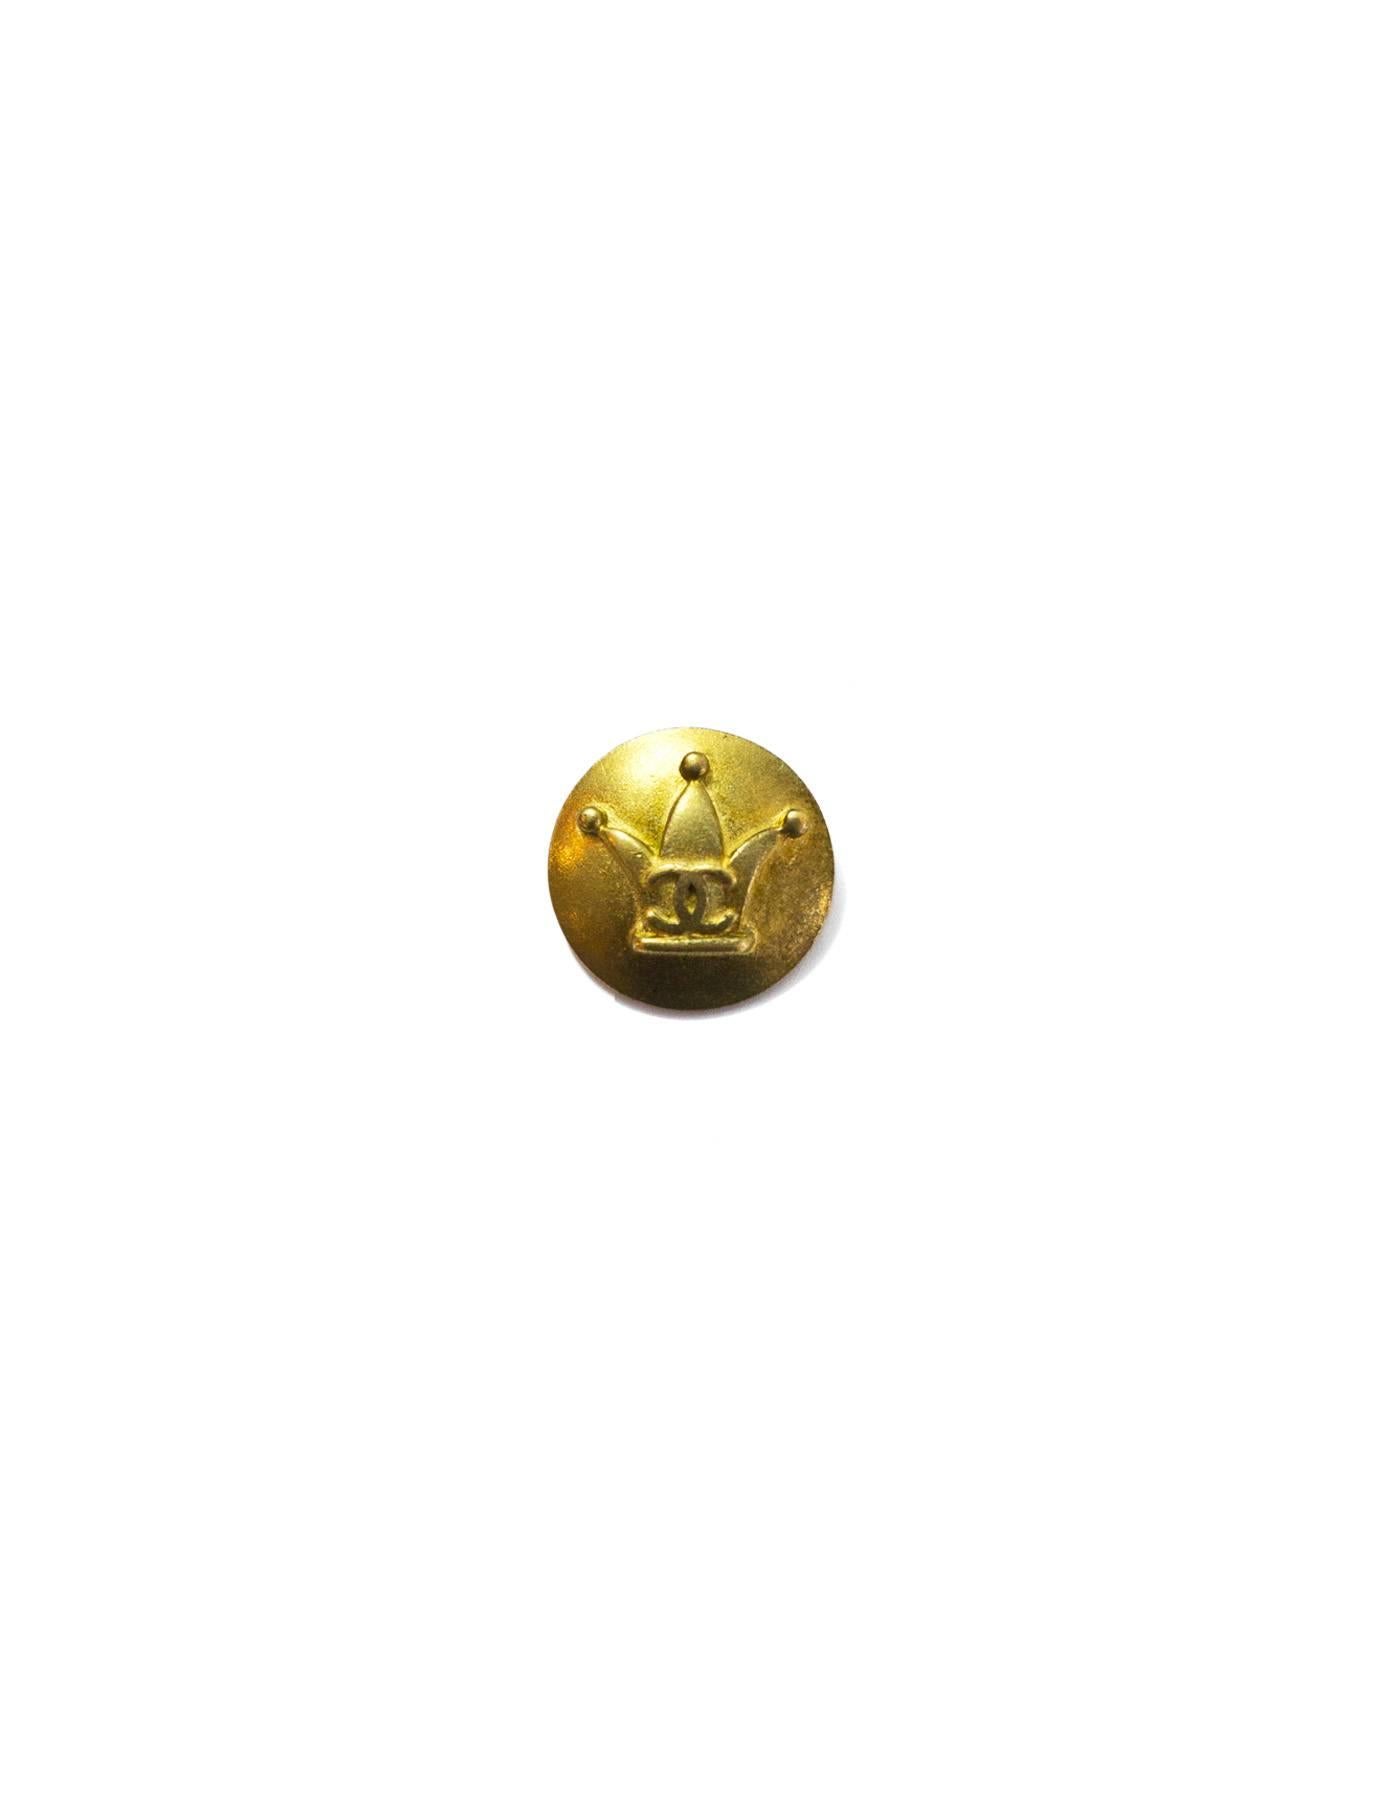 Chanel Goldtone Crown Buttons
Features three 18mm buttons and one 22mm button

Color: Gold
Hardware: Goldtone
Materials: Metal
Stamp: Chanel
Overall Condition: Very good good pre-owned condition, light surface marks

Measurements: 
Diameter: 18mm,